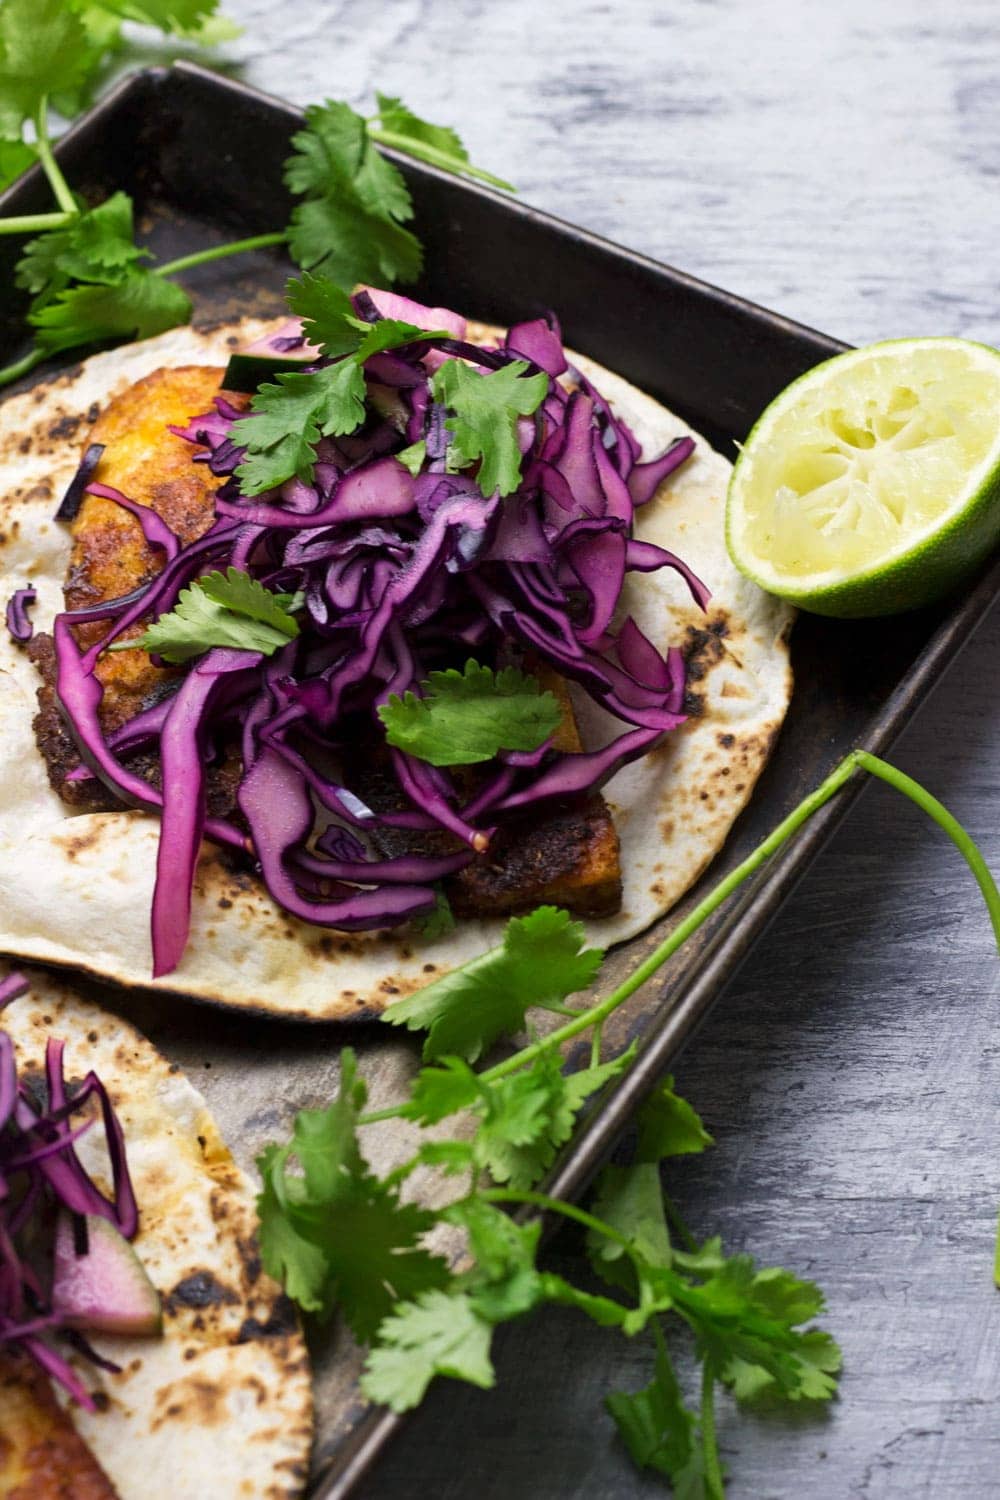 These halloumi tacos are beautifully spiced and topped with a fresh and healthy cabbage slaw. An ideal vegetarian Mexican dinner!